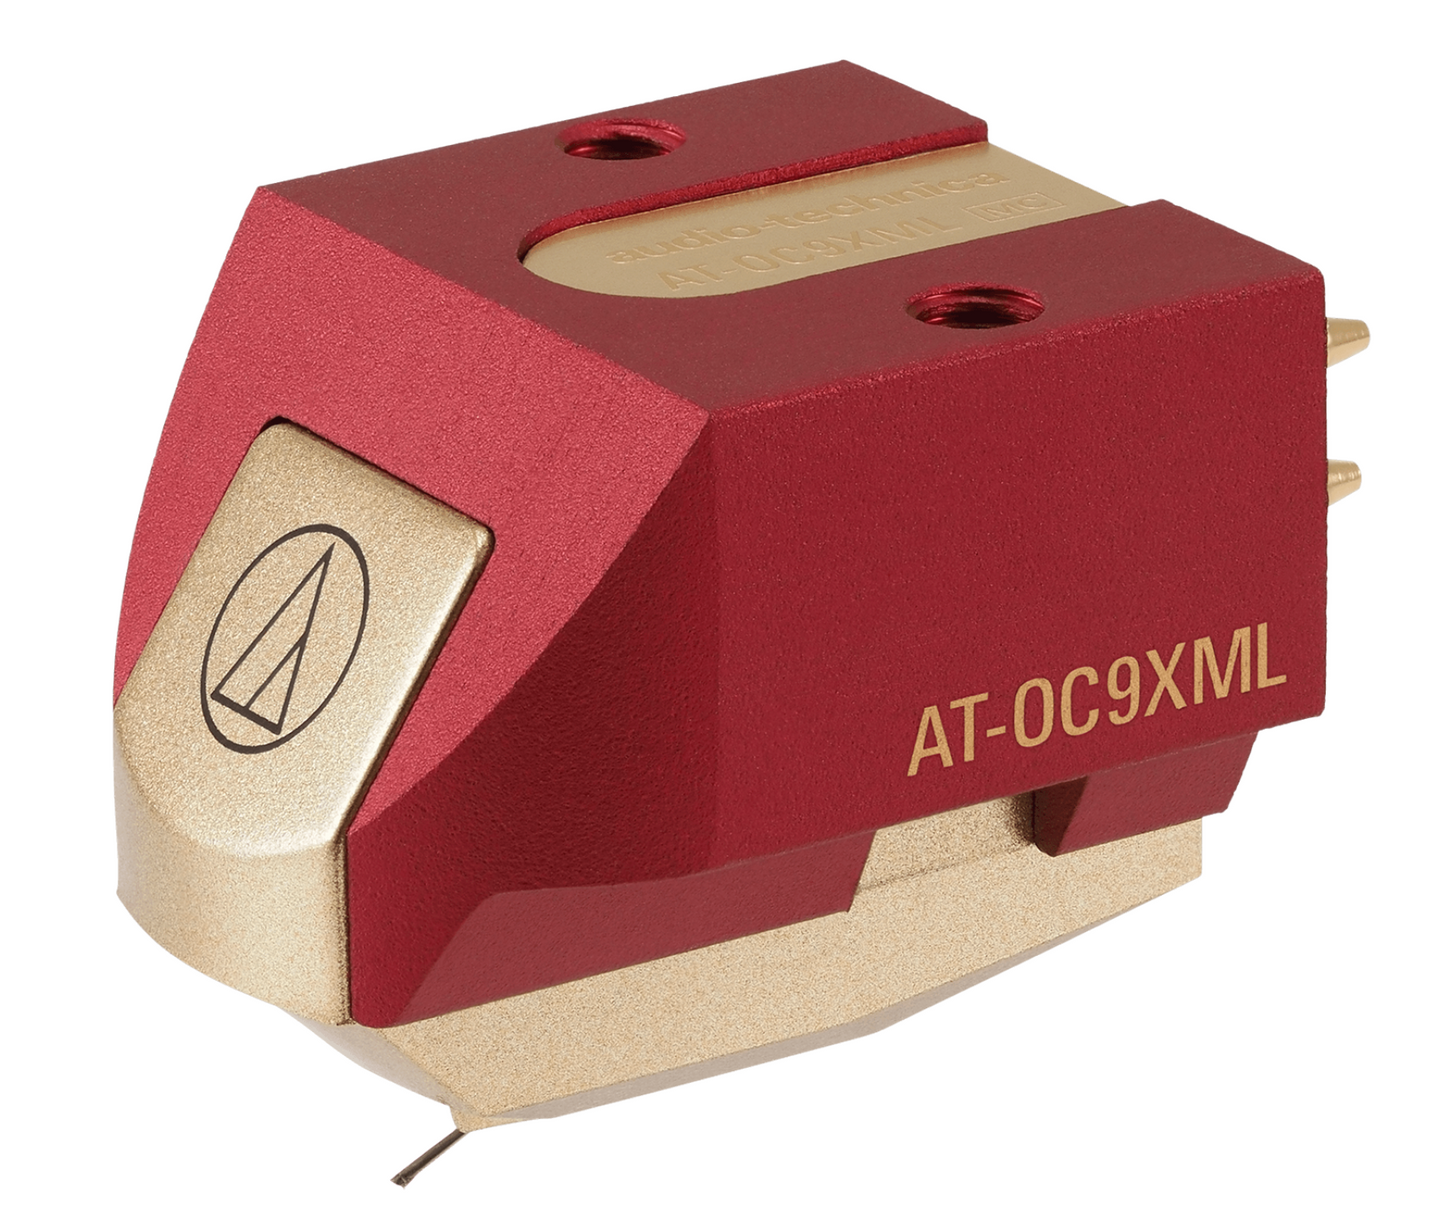 Audio-Technica Cartridges Audio Technica AT-OC9XML Moving Coil Phono Cartridge, front and side image